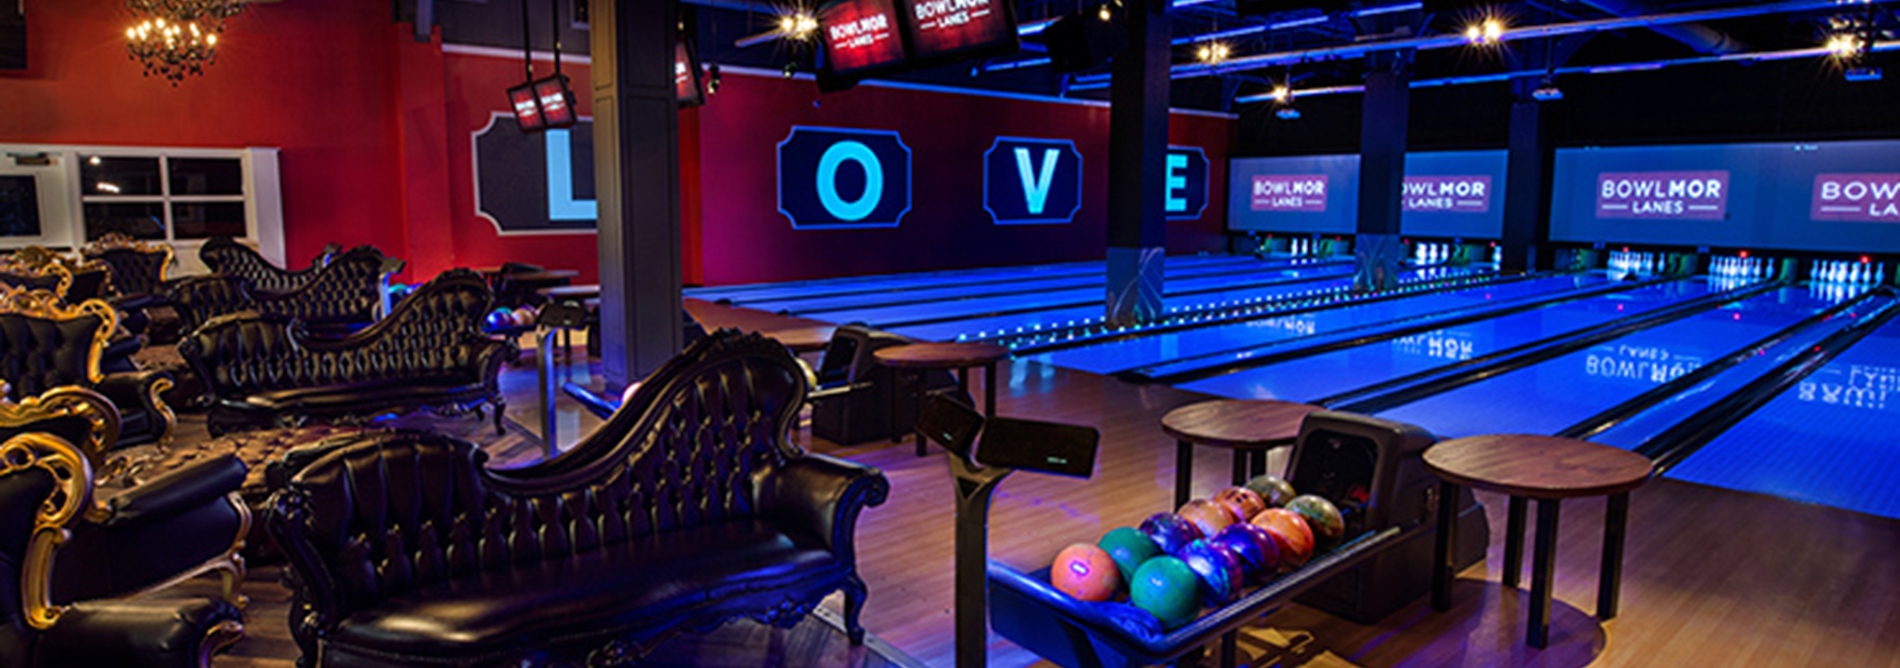 QUBICAAMF-bowling-boutique-Bowlmor-Times-Square-banner.jpg